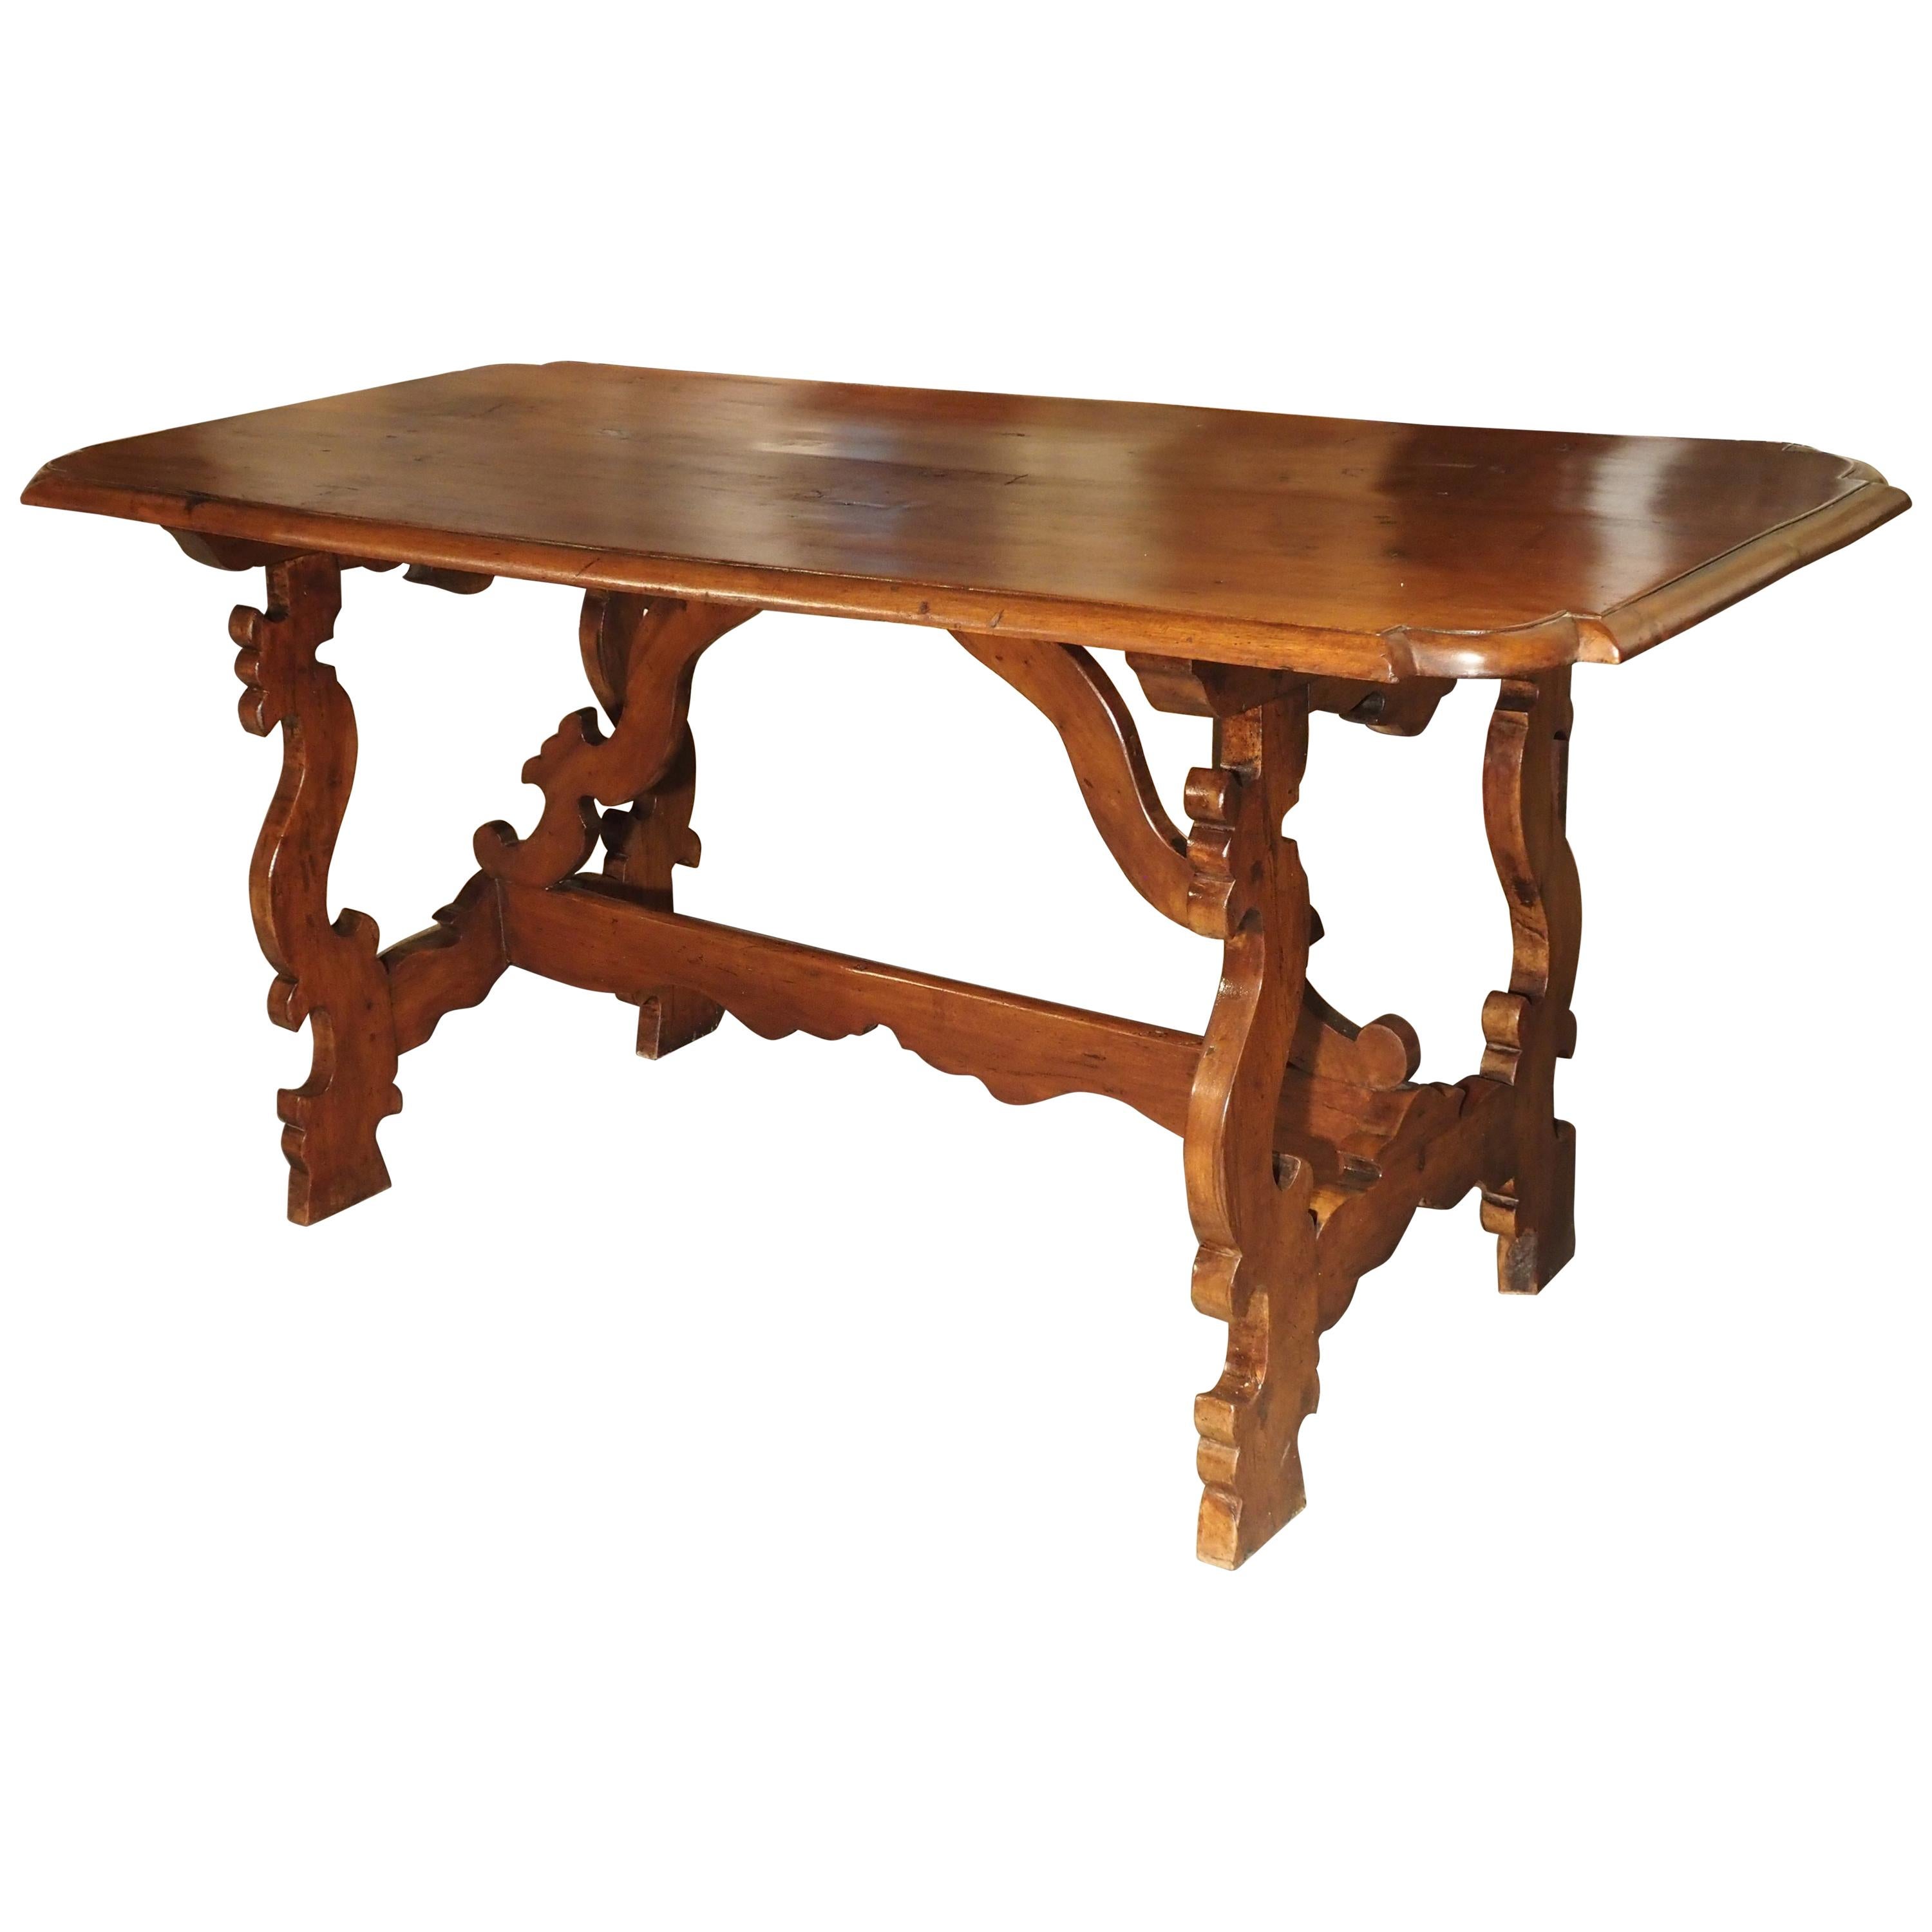 19th Century Tuscan Walnut Table with Shaped Wooden Stretchers